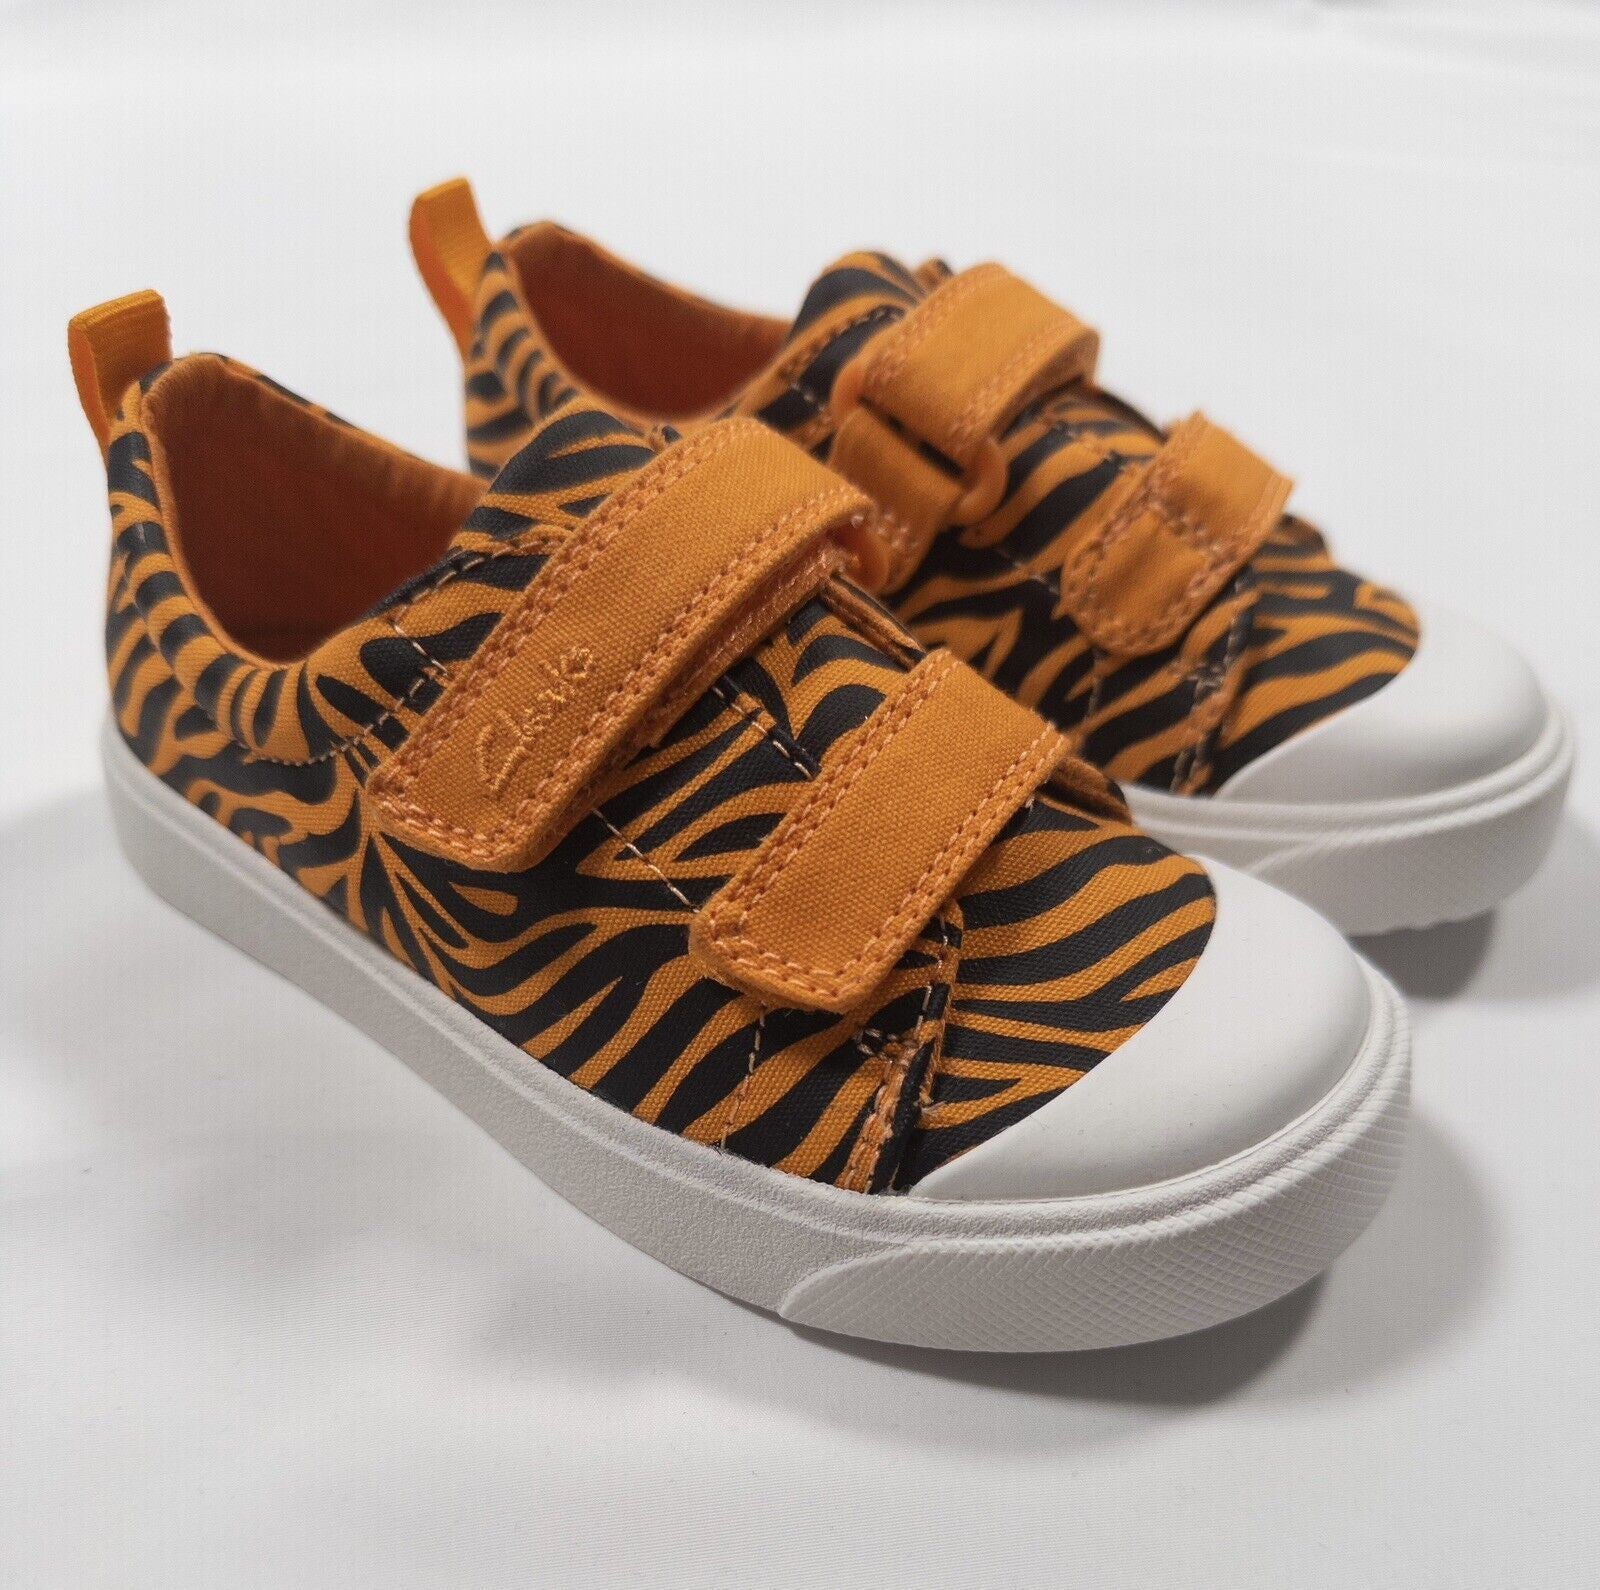 Unisex kids Boys / Girls Clarks trainers Shoes size UK 8.5 G Tiger Print